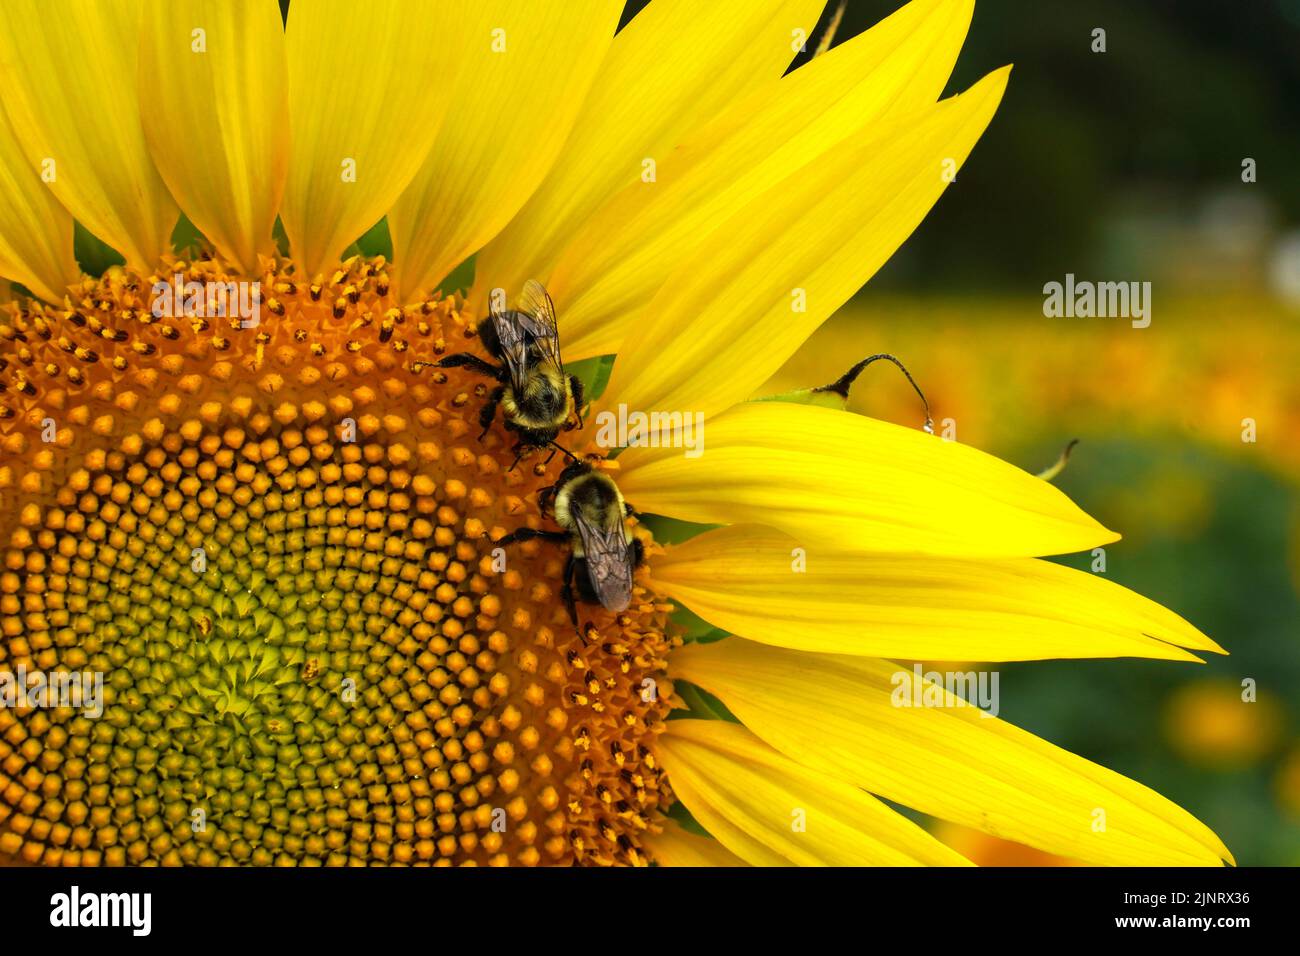 Two Eastern Bumblebees, Bombus impatiens, meeting on a sunflower while they collect pollen. Stock Photo